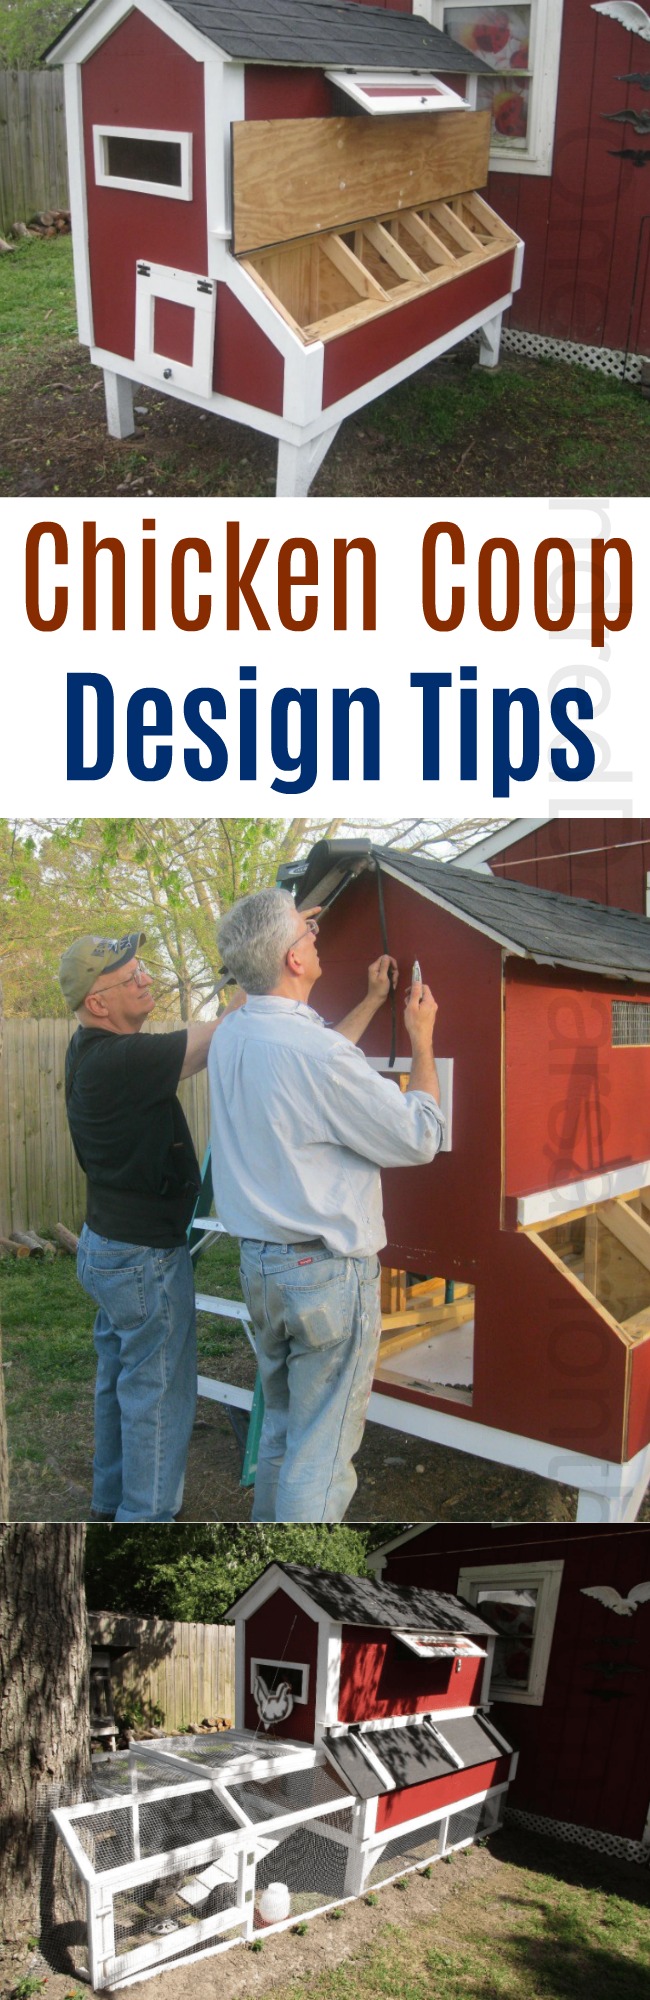 Mavis Mail – Bruce From Norfolk, VA Sends in His Chicken Coop Photos and Lot’s of Building Tips